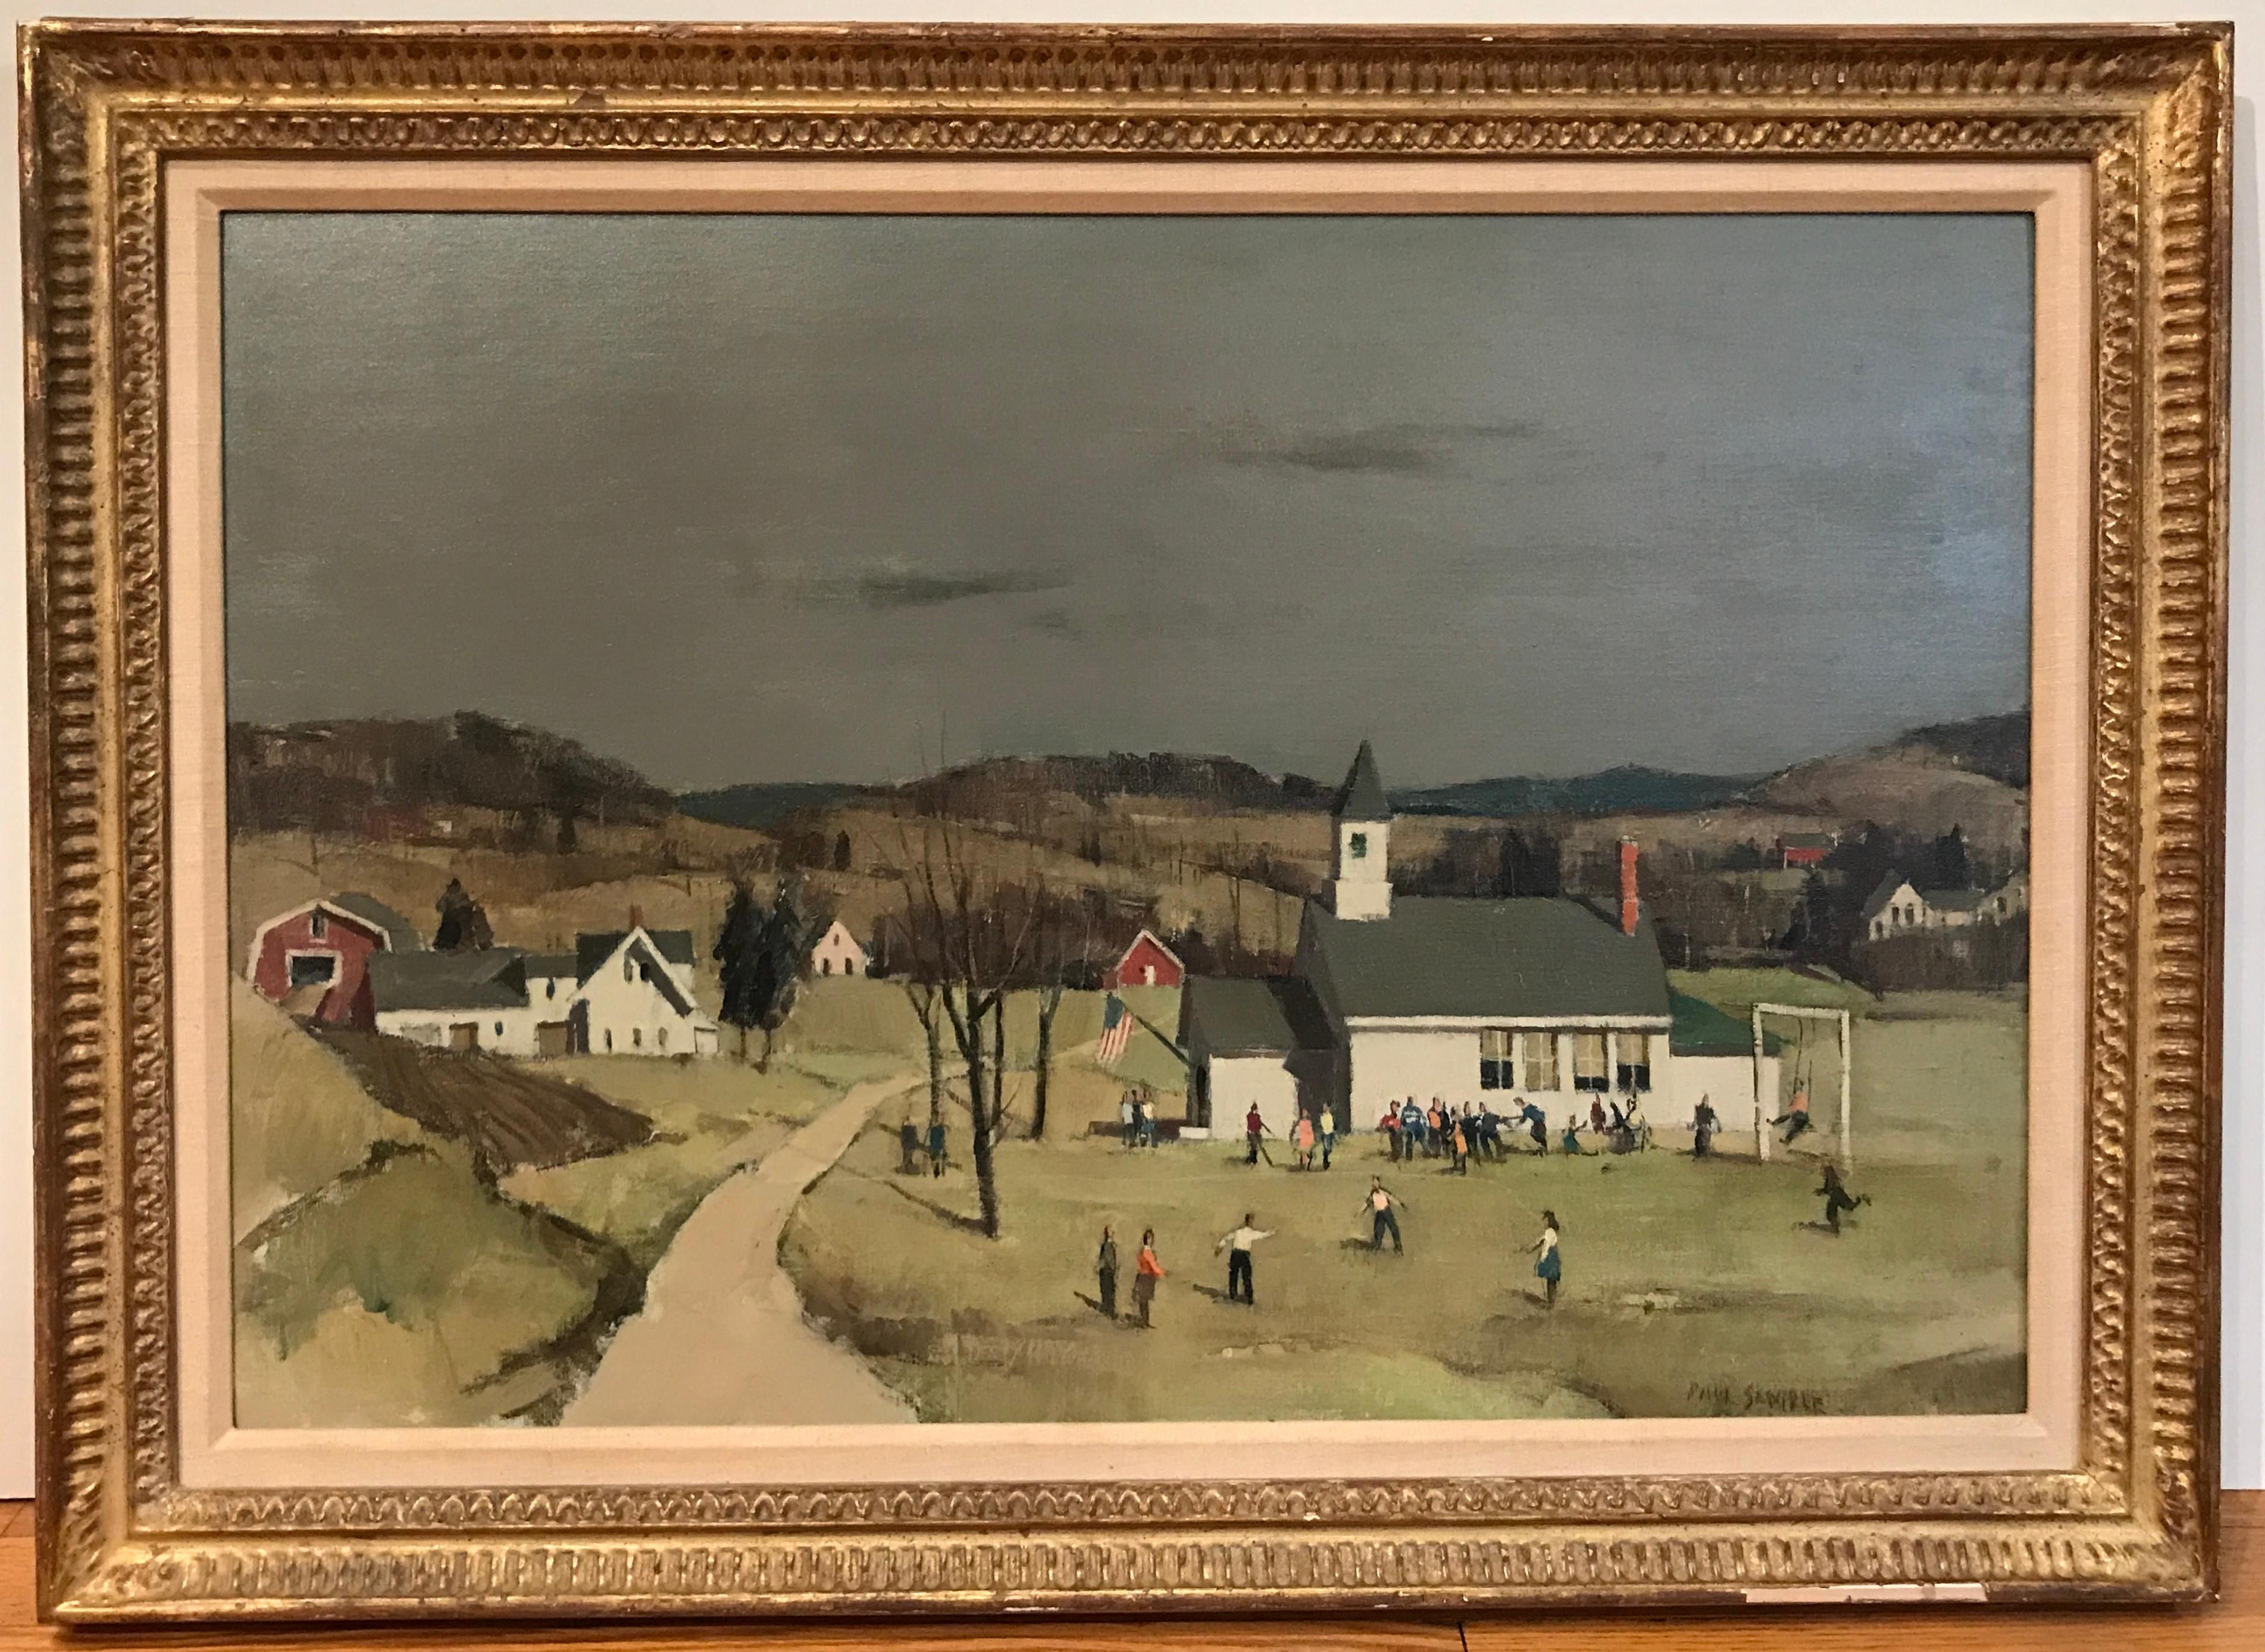   Schoolhouse in Vermont - Painting by Paul Sample